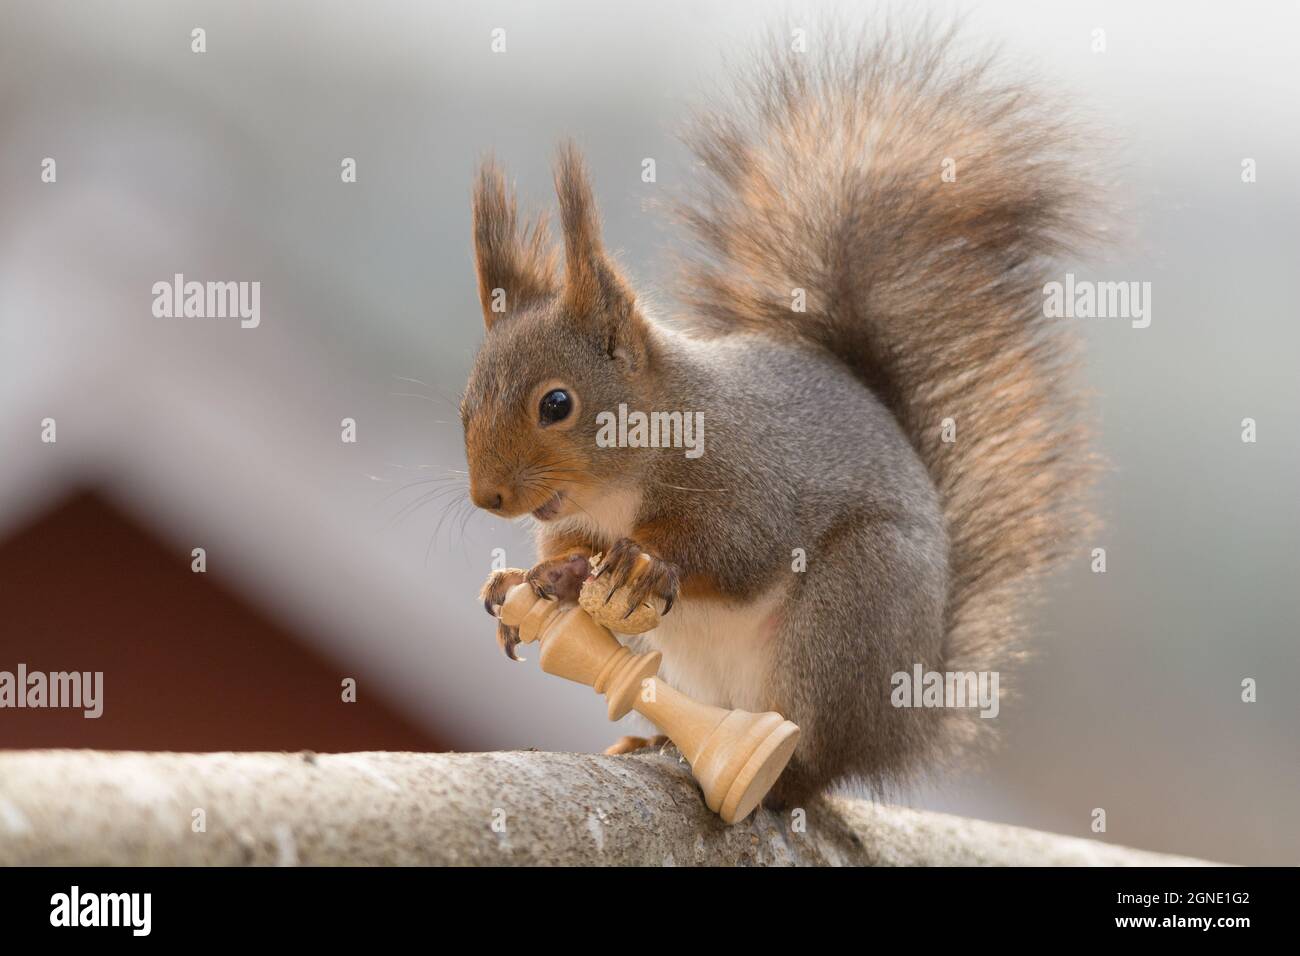 close up of  red squirrel with a chess piece in hands Stock Photo